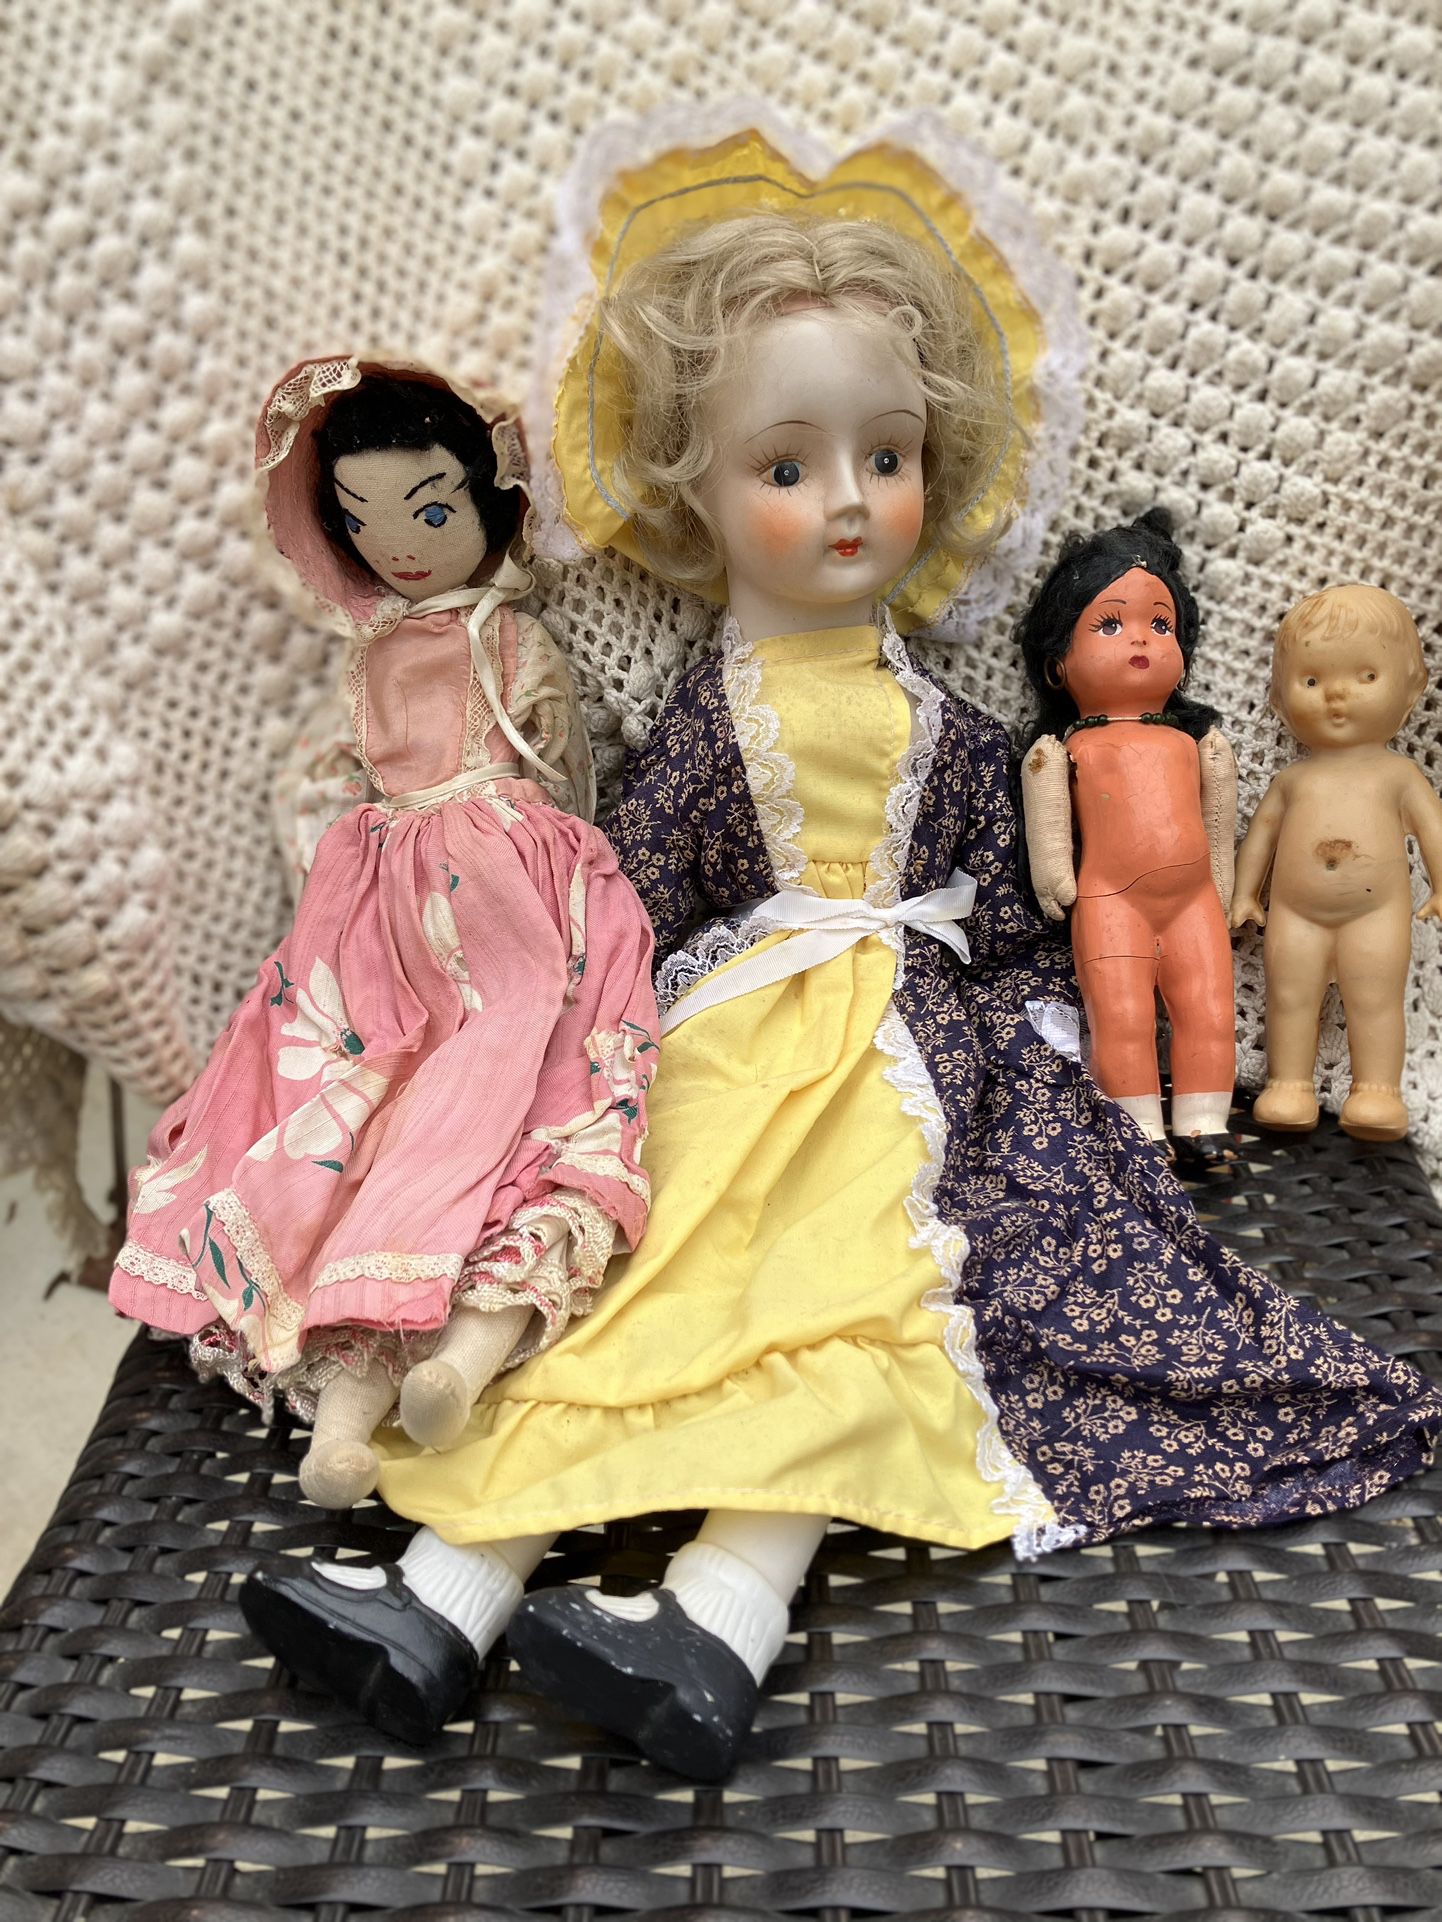 Doll collection